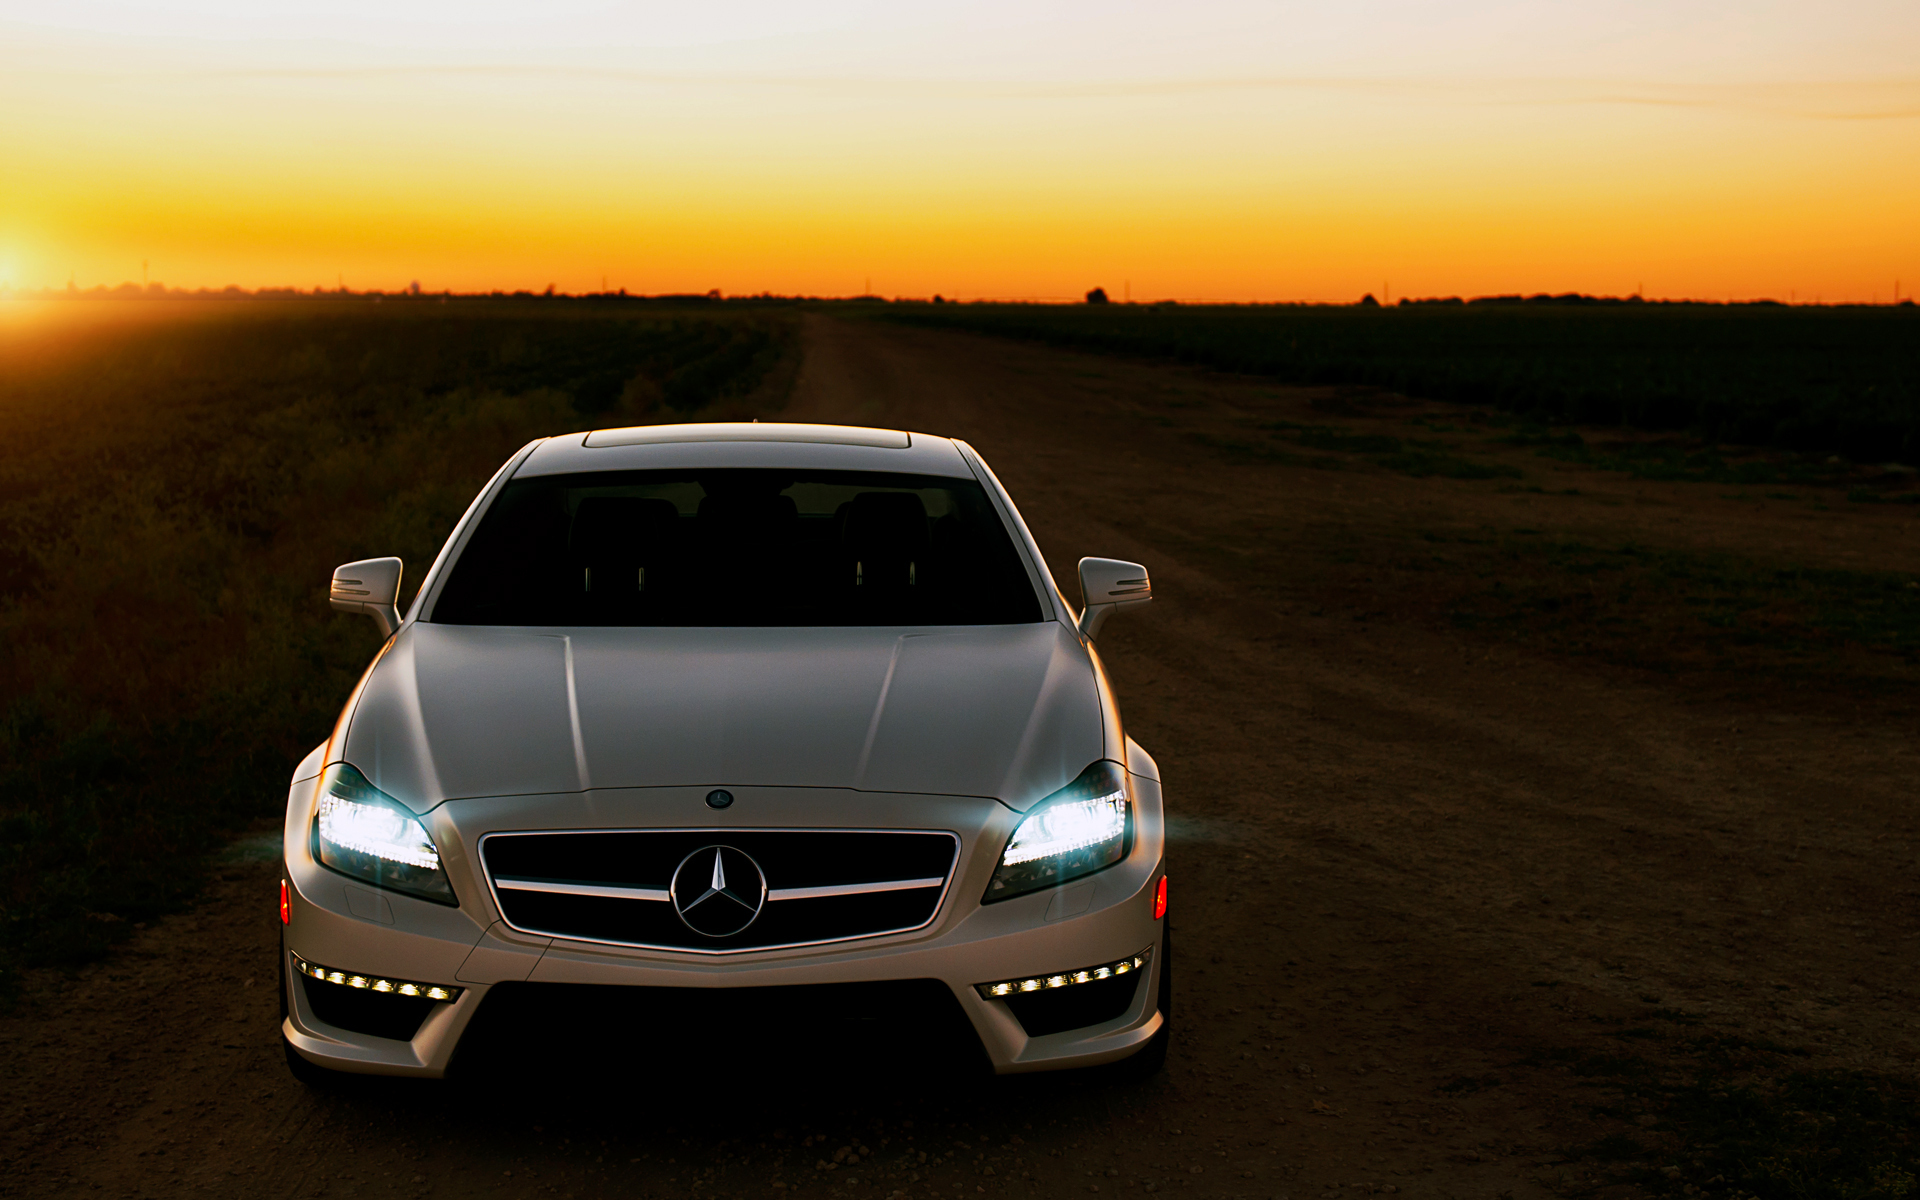 White Mercedes Benz CLS 63 AMG Wallpapers - 1920x1200 - 1177815